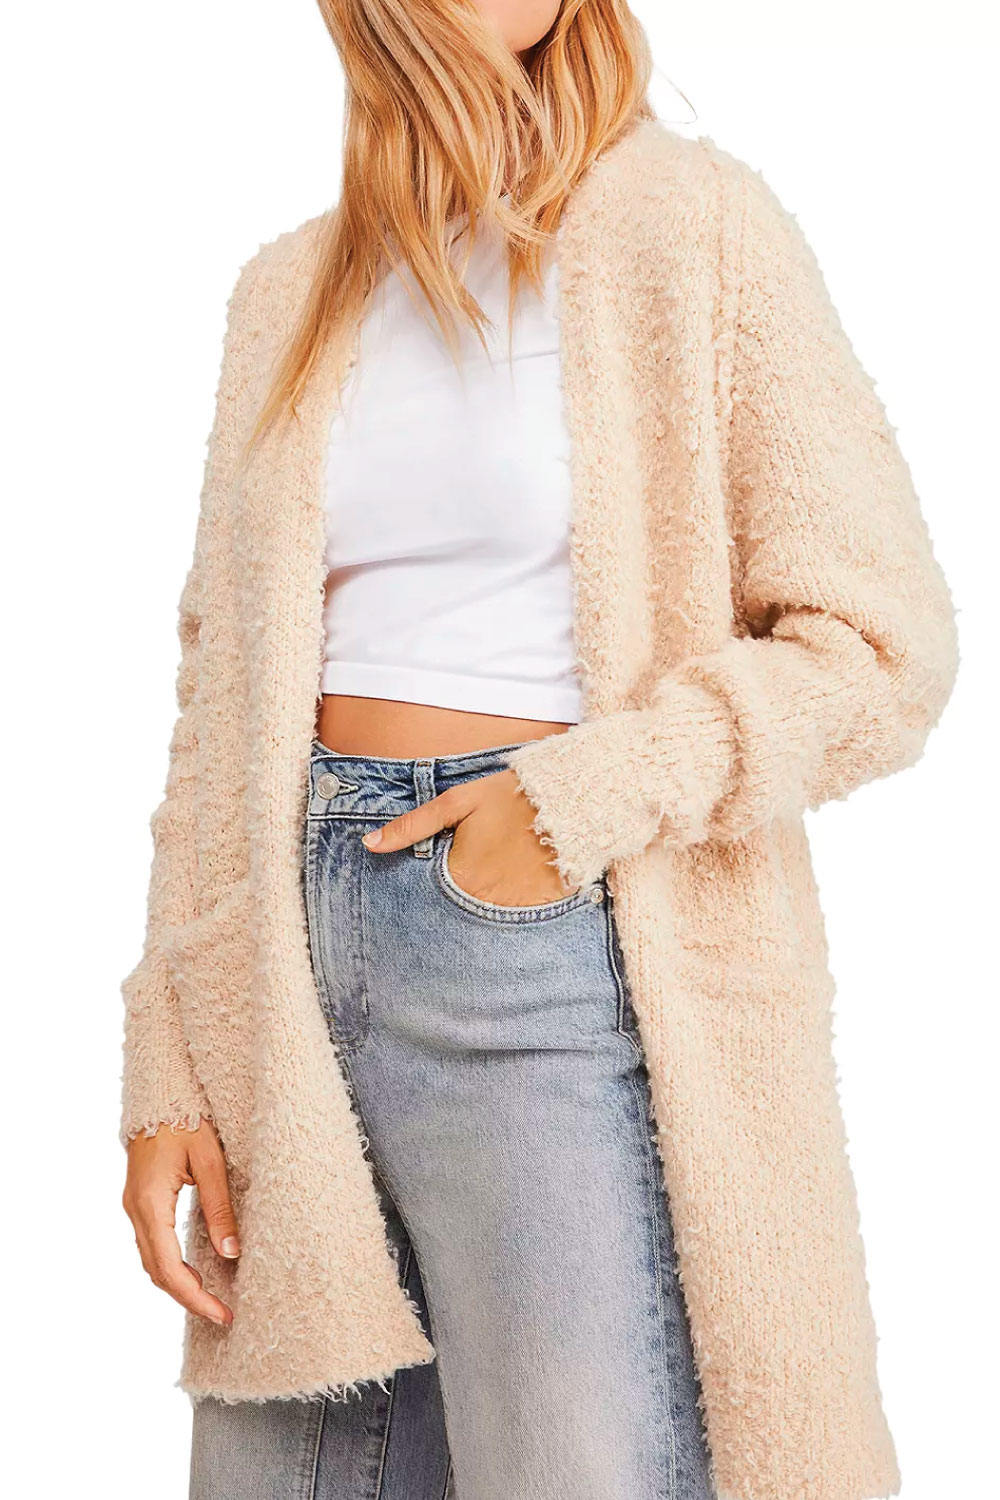 Free People Once In A Lifetime Long Cardigan